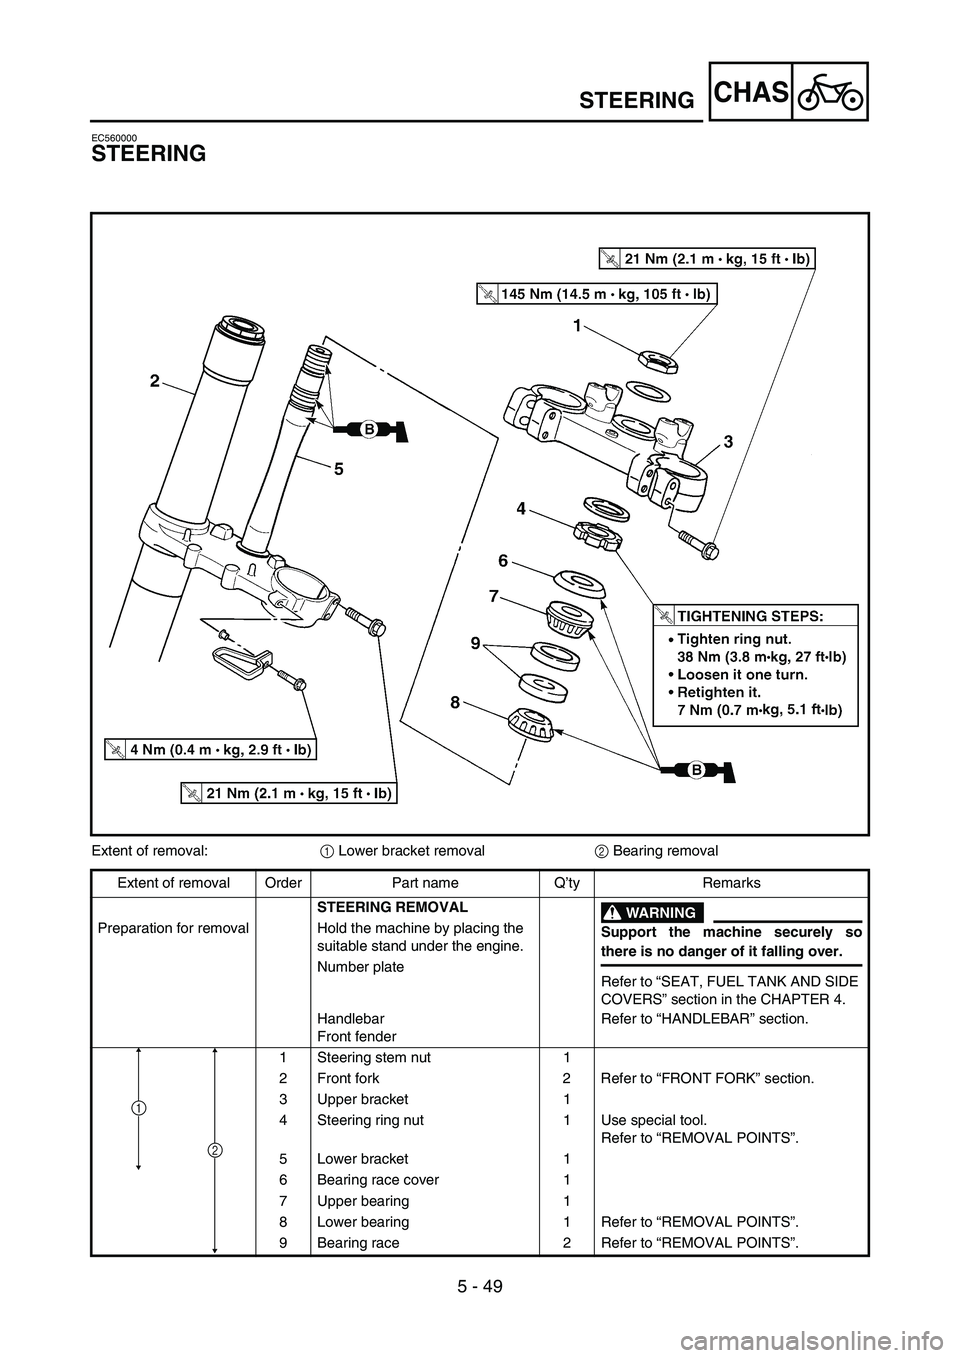 YAMAHA YZ250F 2007 User Guide 5 - 49
CHAS
EC560000
STEERING
Extent of removal:
1 Lower bracket removal
2 Bearing removal
Extent of removal Order Part name Q’ty Remarks
STEERING REMOVAL
WARNING
Support the machine securely so
the